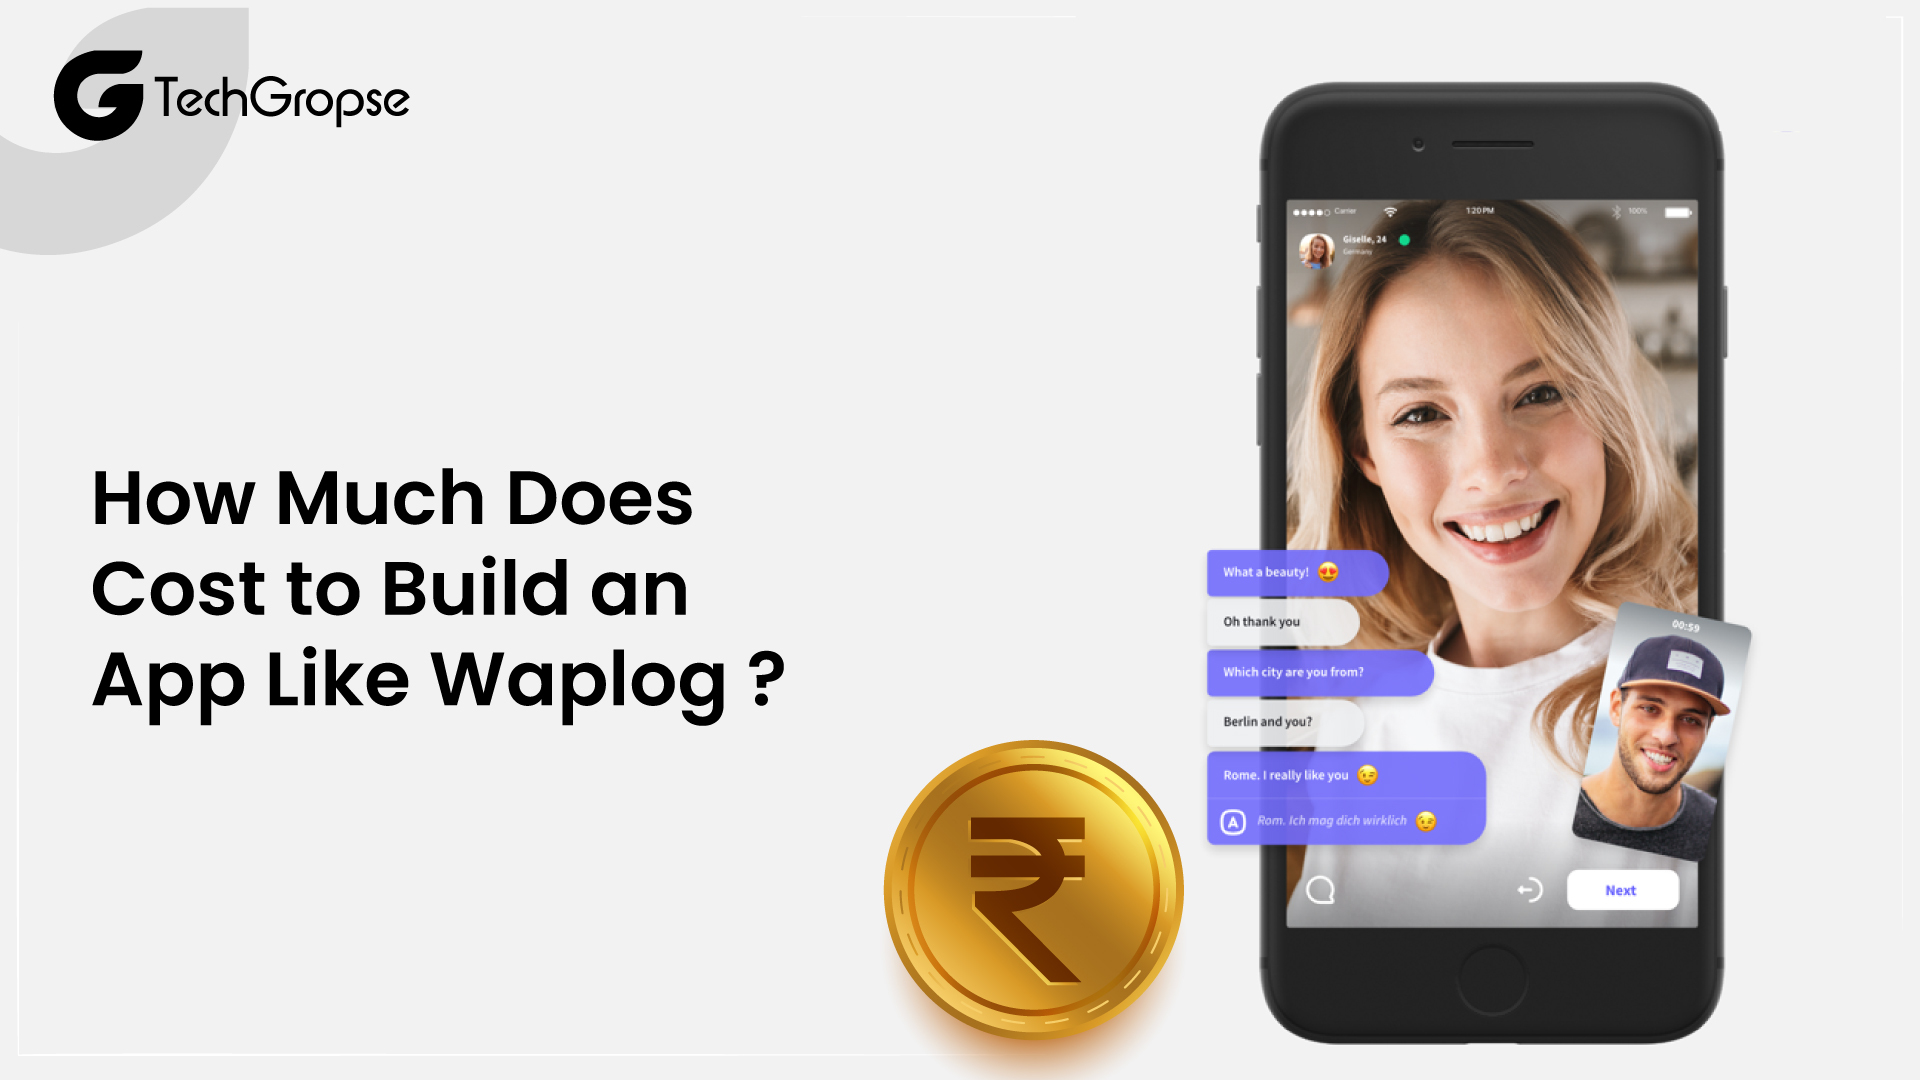 How Much Does Cost to Build an App Like Waplog